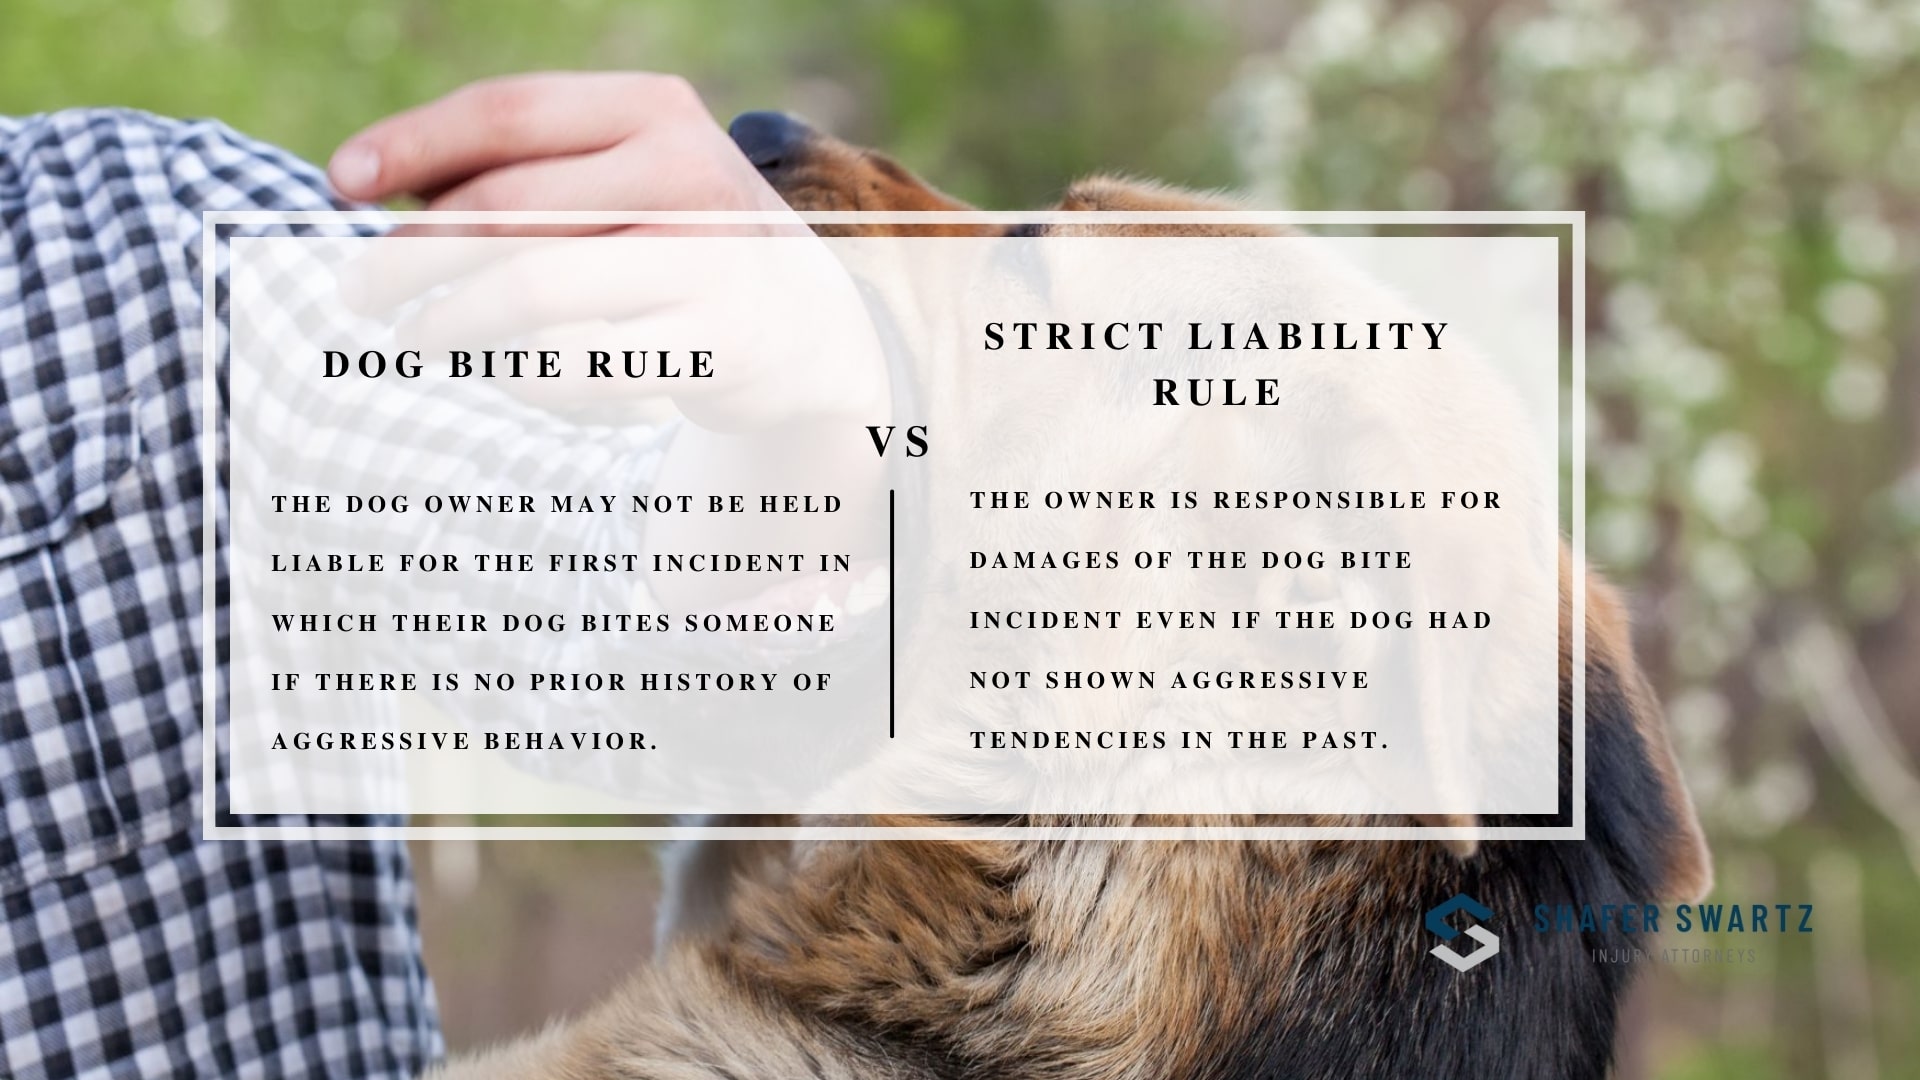 Infographic image of dog bite rule vs strict liability rule